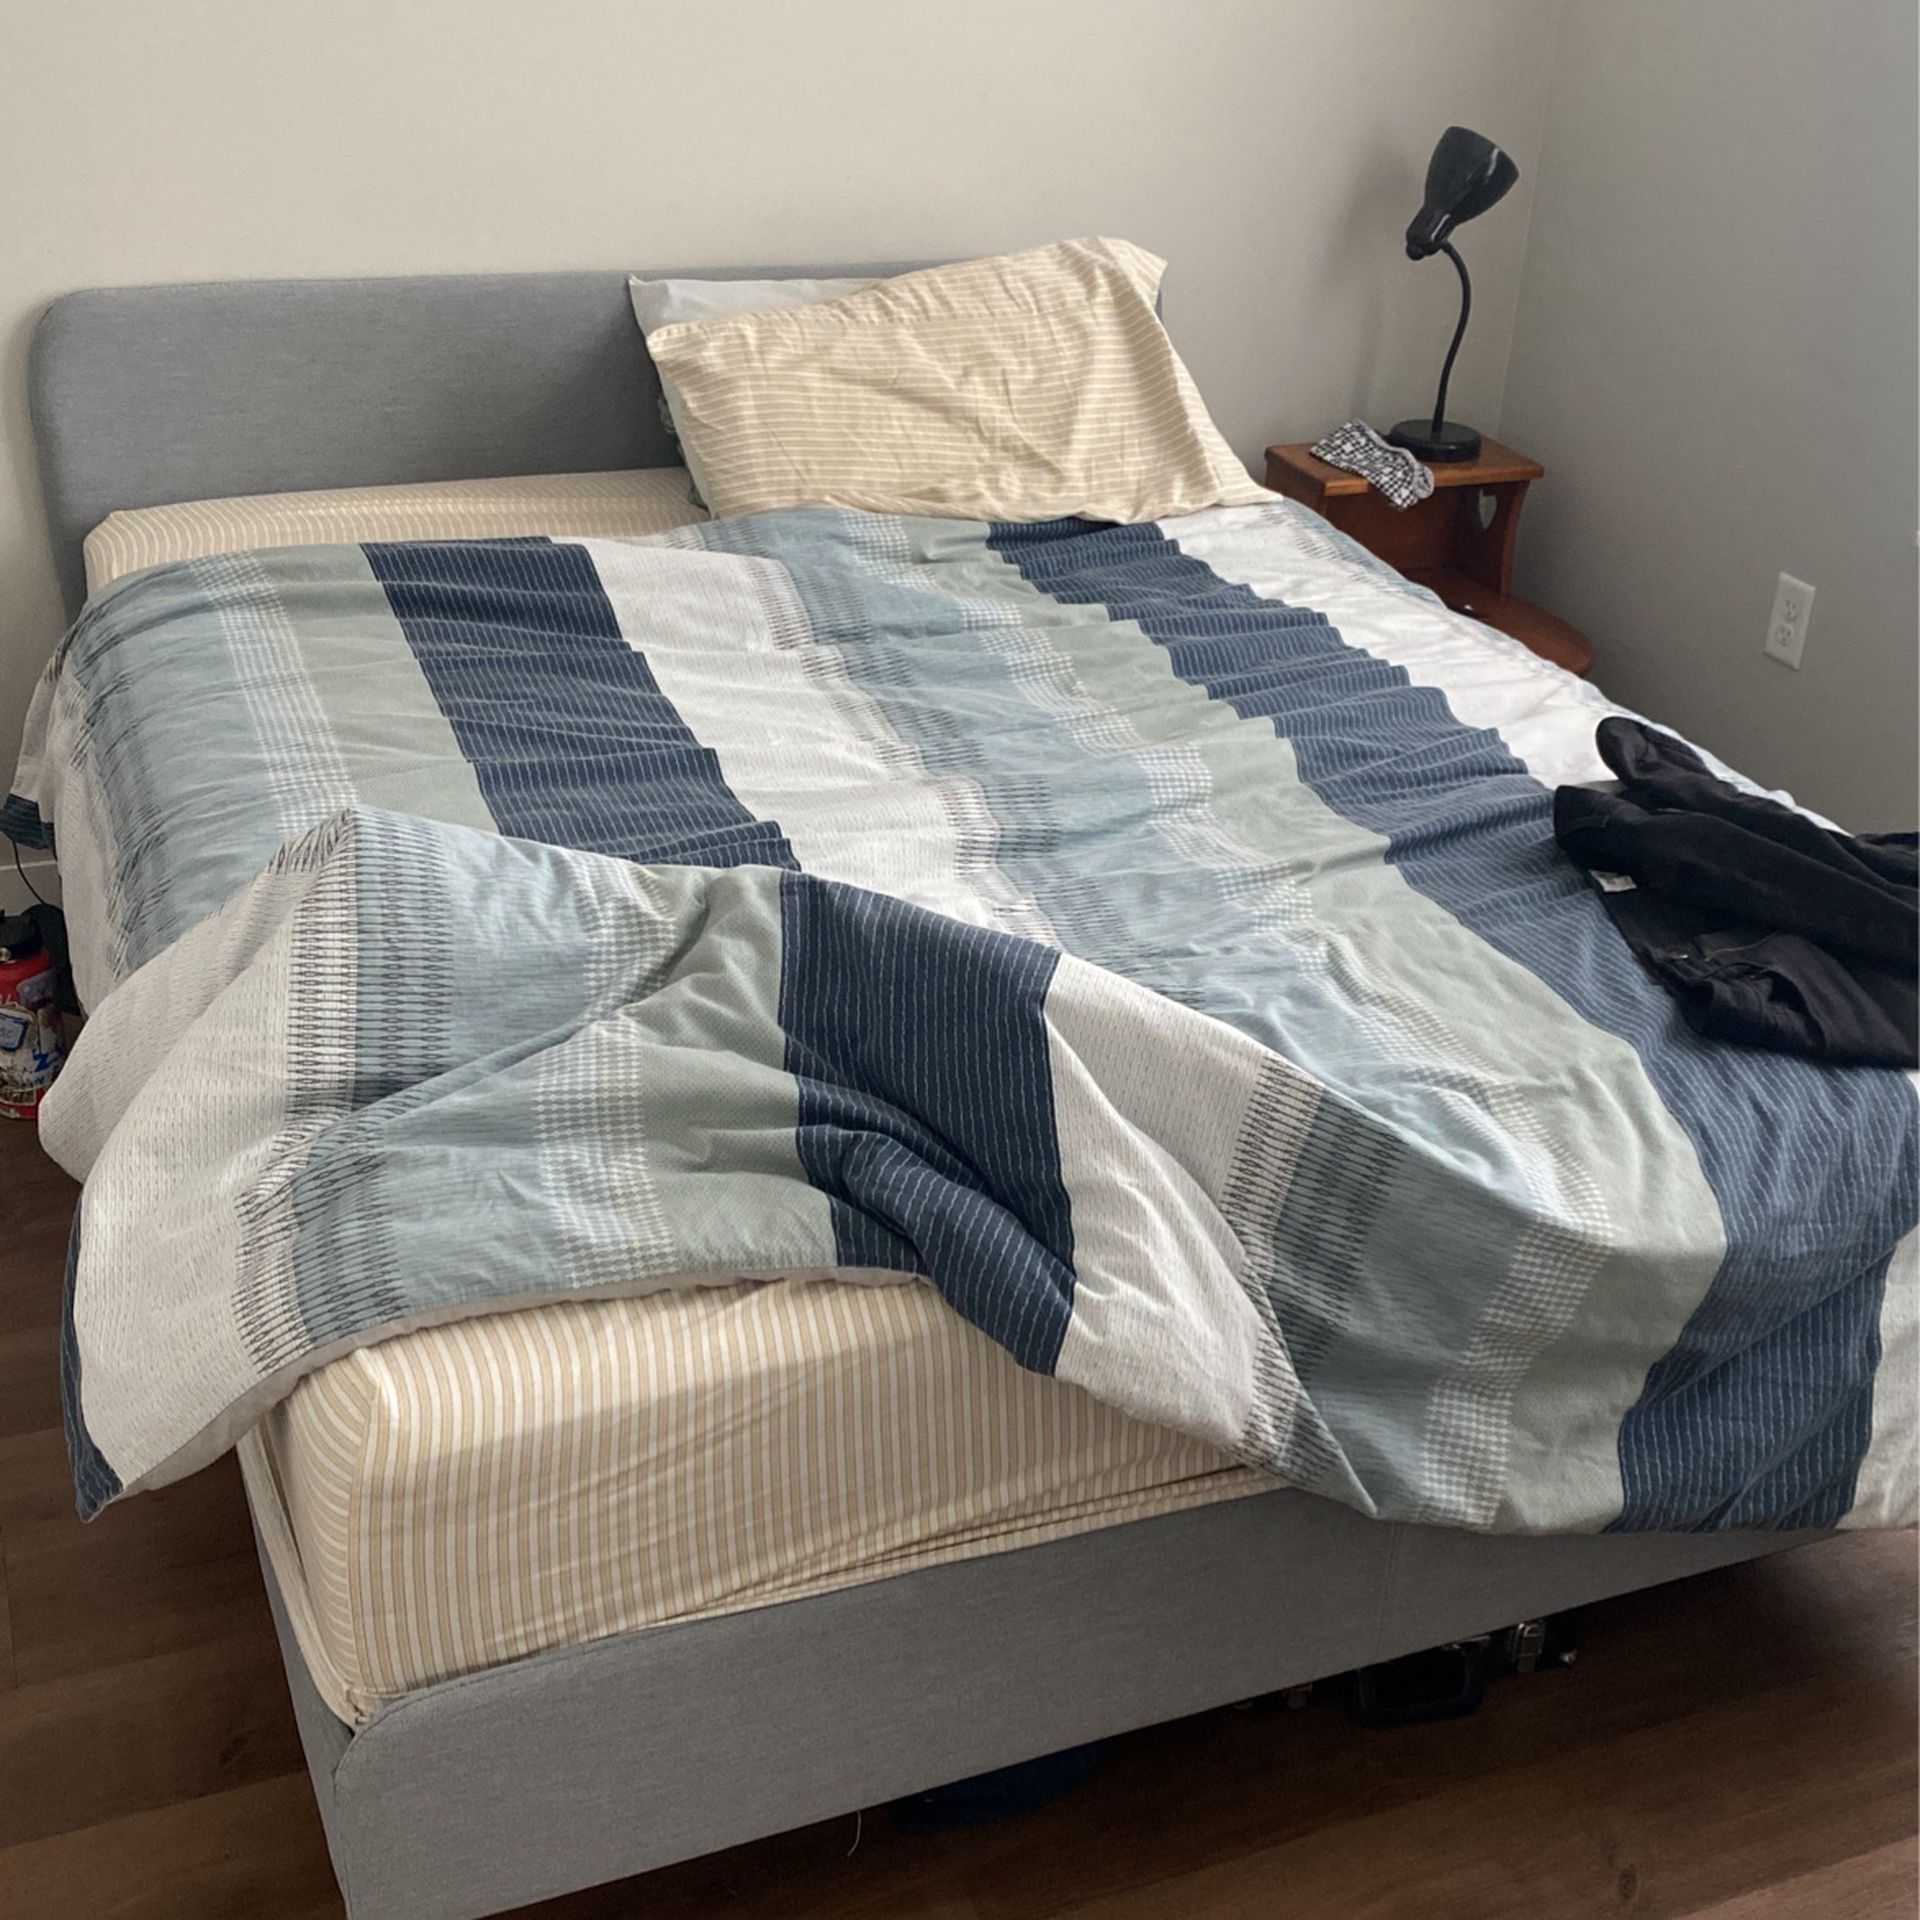 IKEA Queen Spring Mattress With Bed Frame